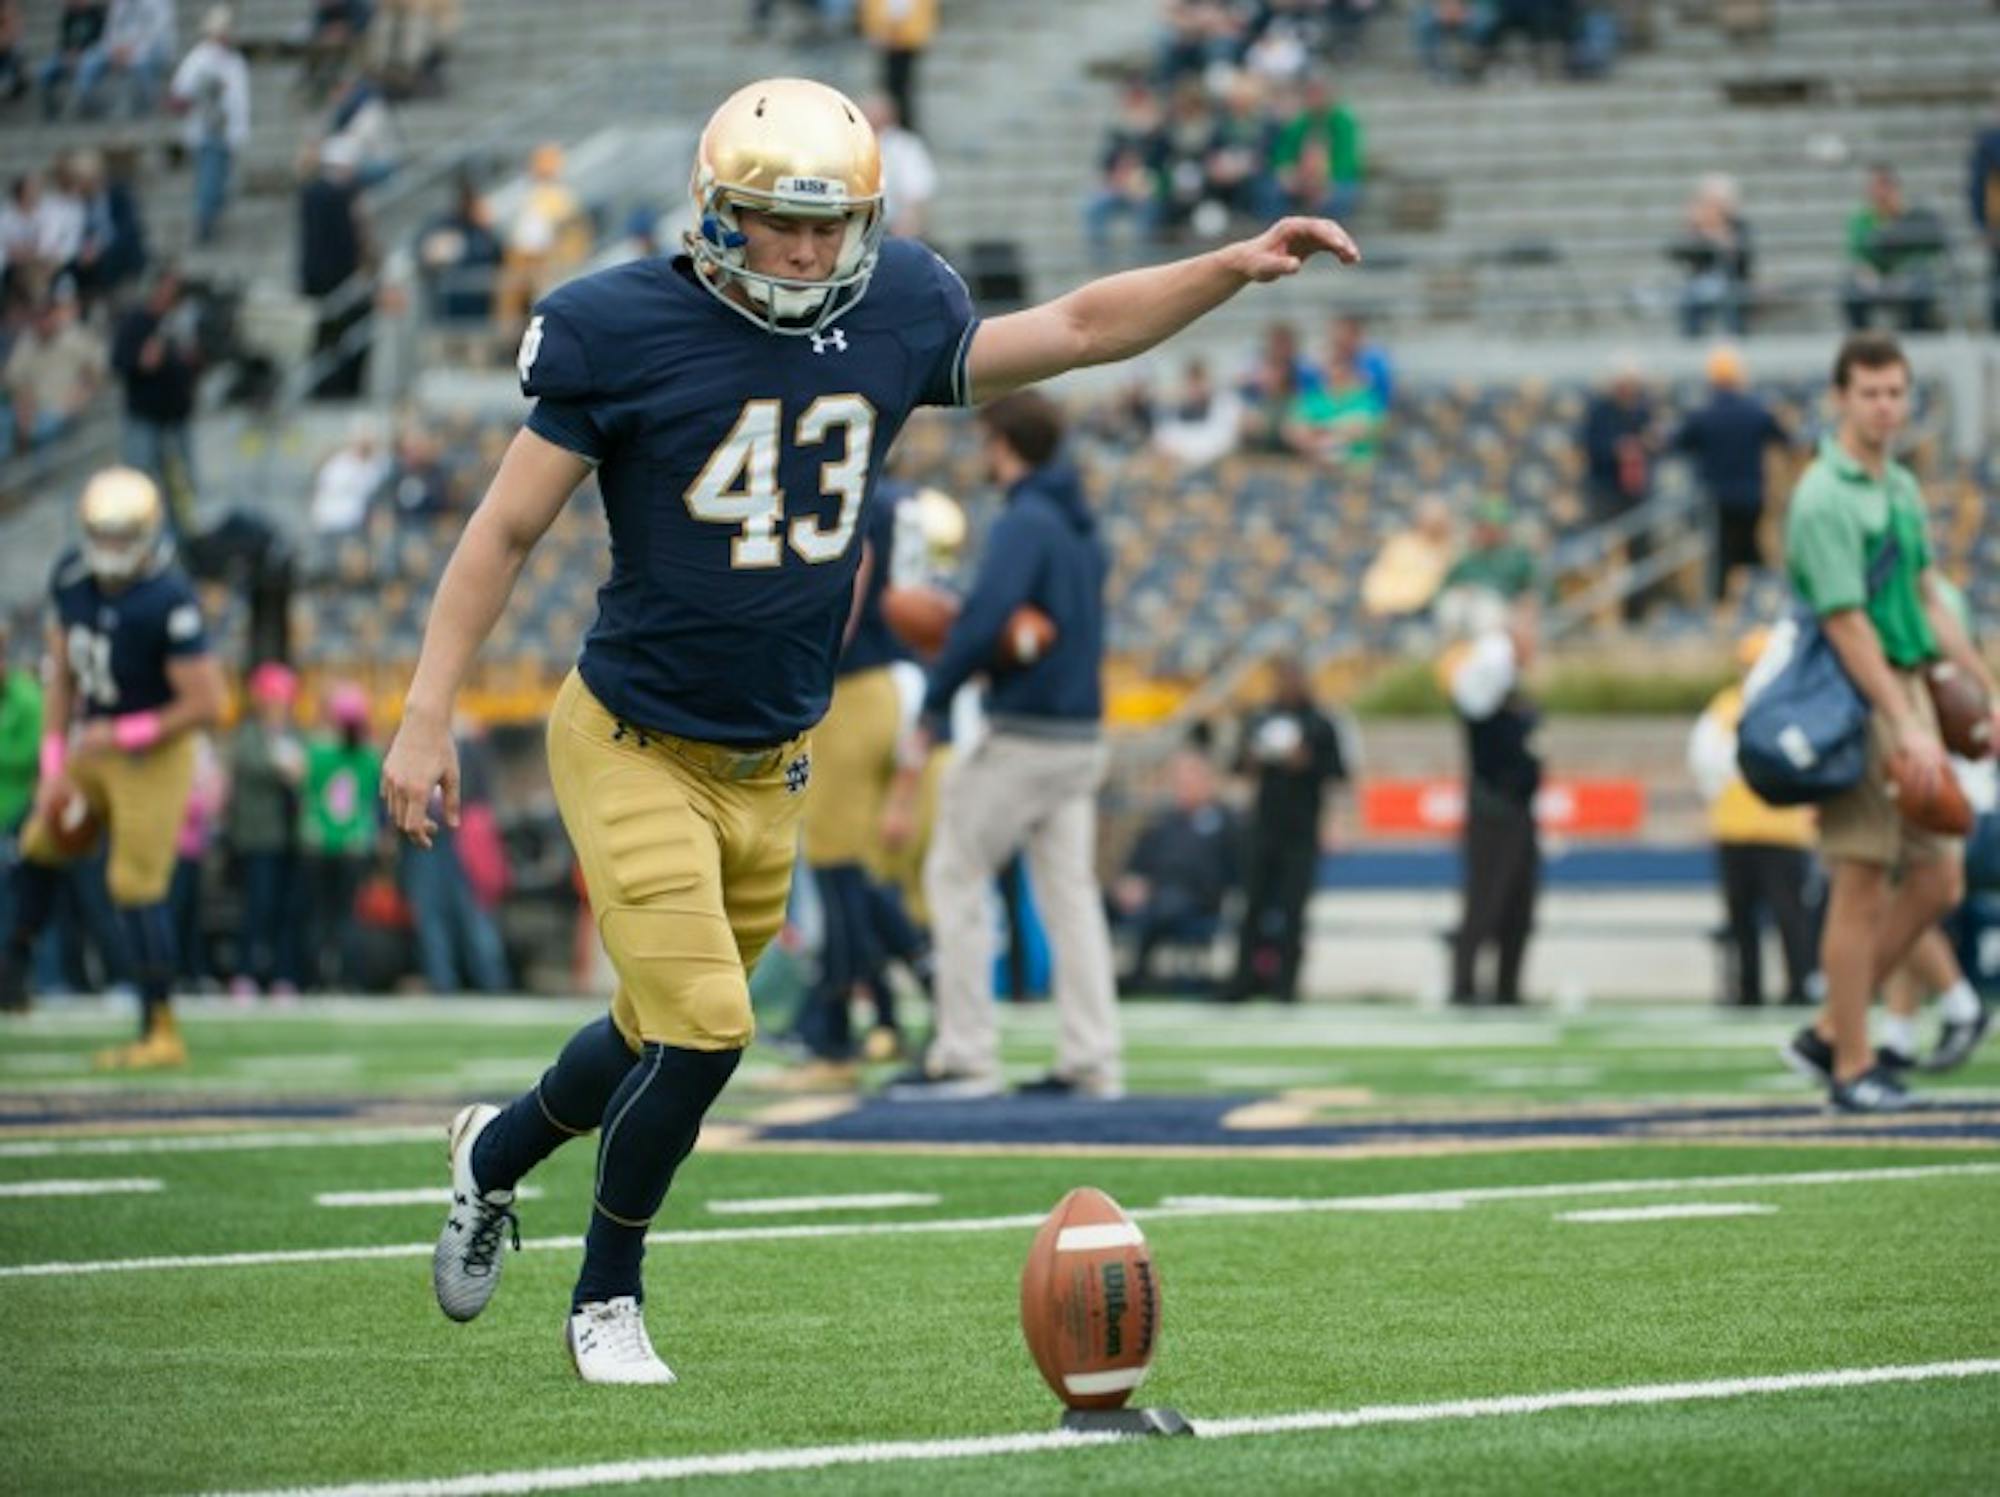 Irish senior kicker John Chereson practices before Notre Dame’s victory over Miami on Oct. 29 at Notre Dame Stadium. Chereson kicked off three times in the game, including one that went for a touchback.